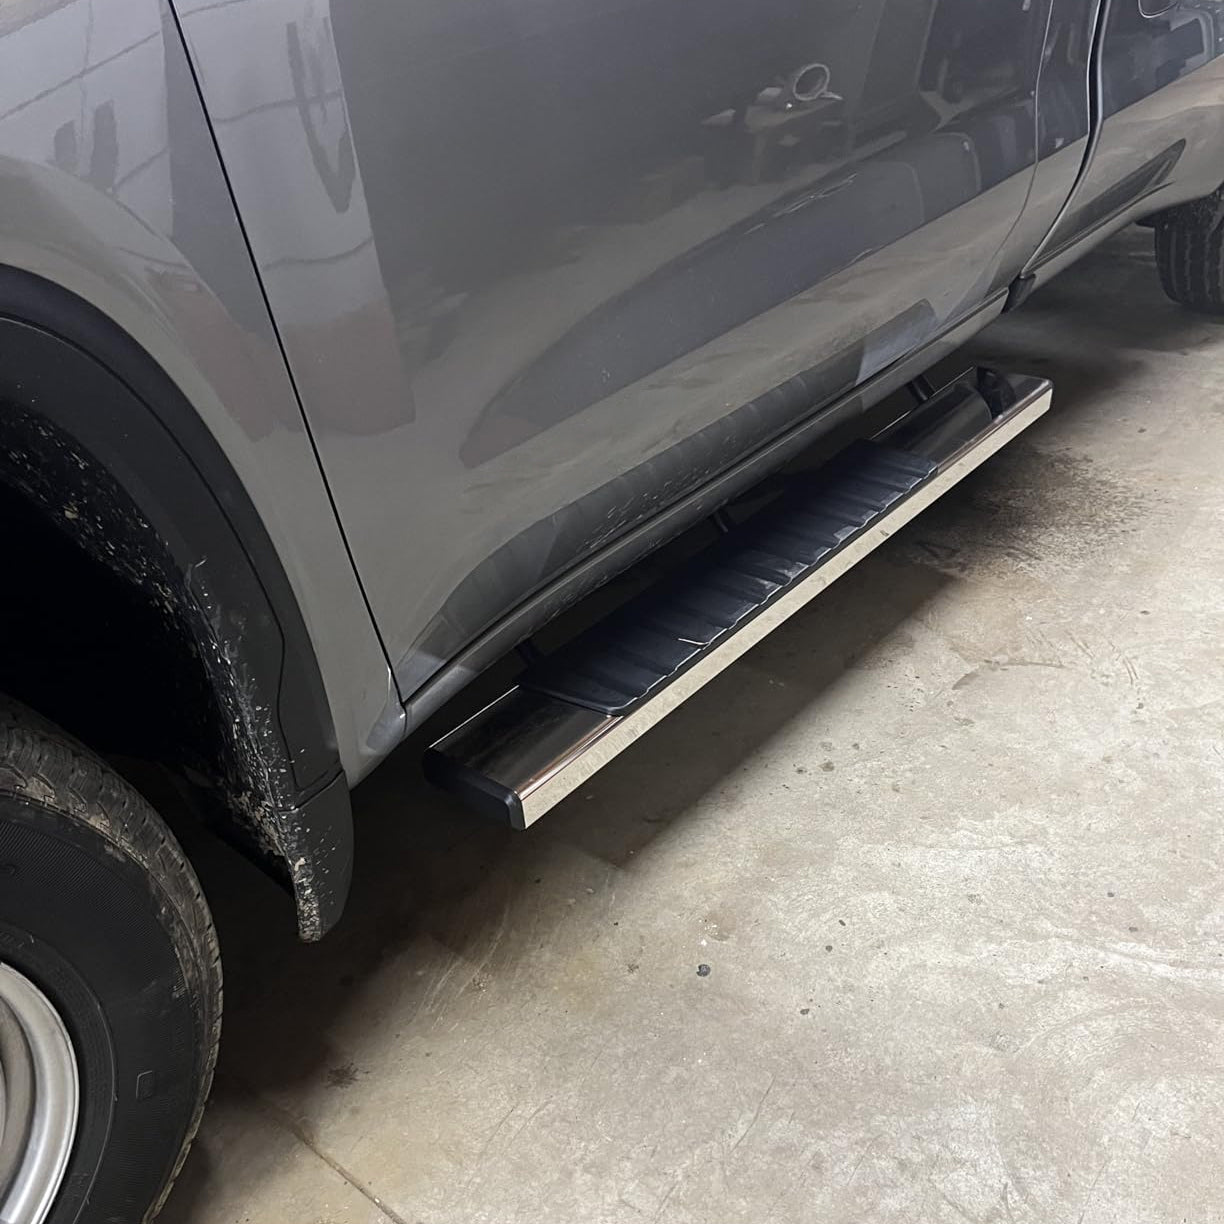 Running Boards Compatible with 2015-2023 Ford F150 Regular/Standard/Single Cab, Stainless Steel Side Steps H6 Style. - COMNOVA AUTOPART